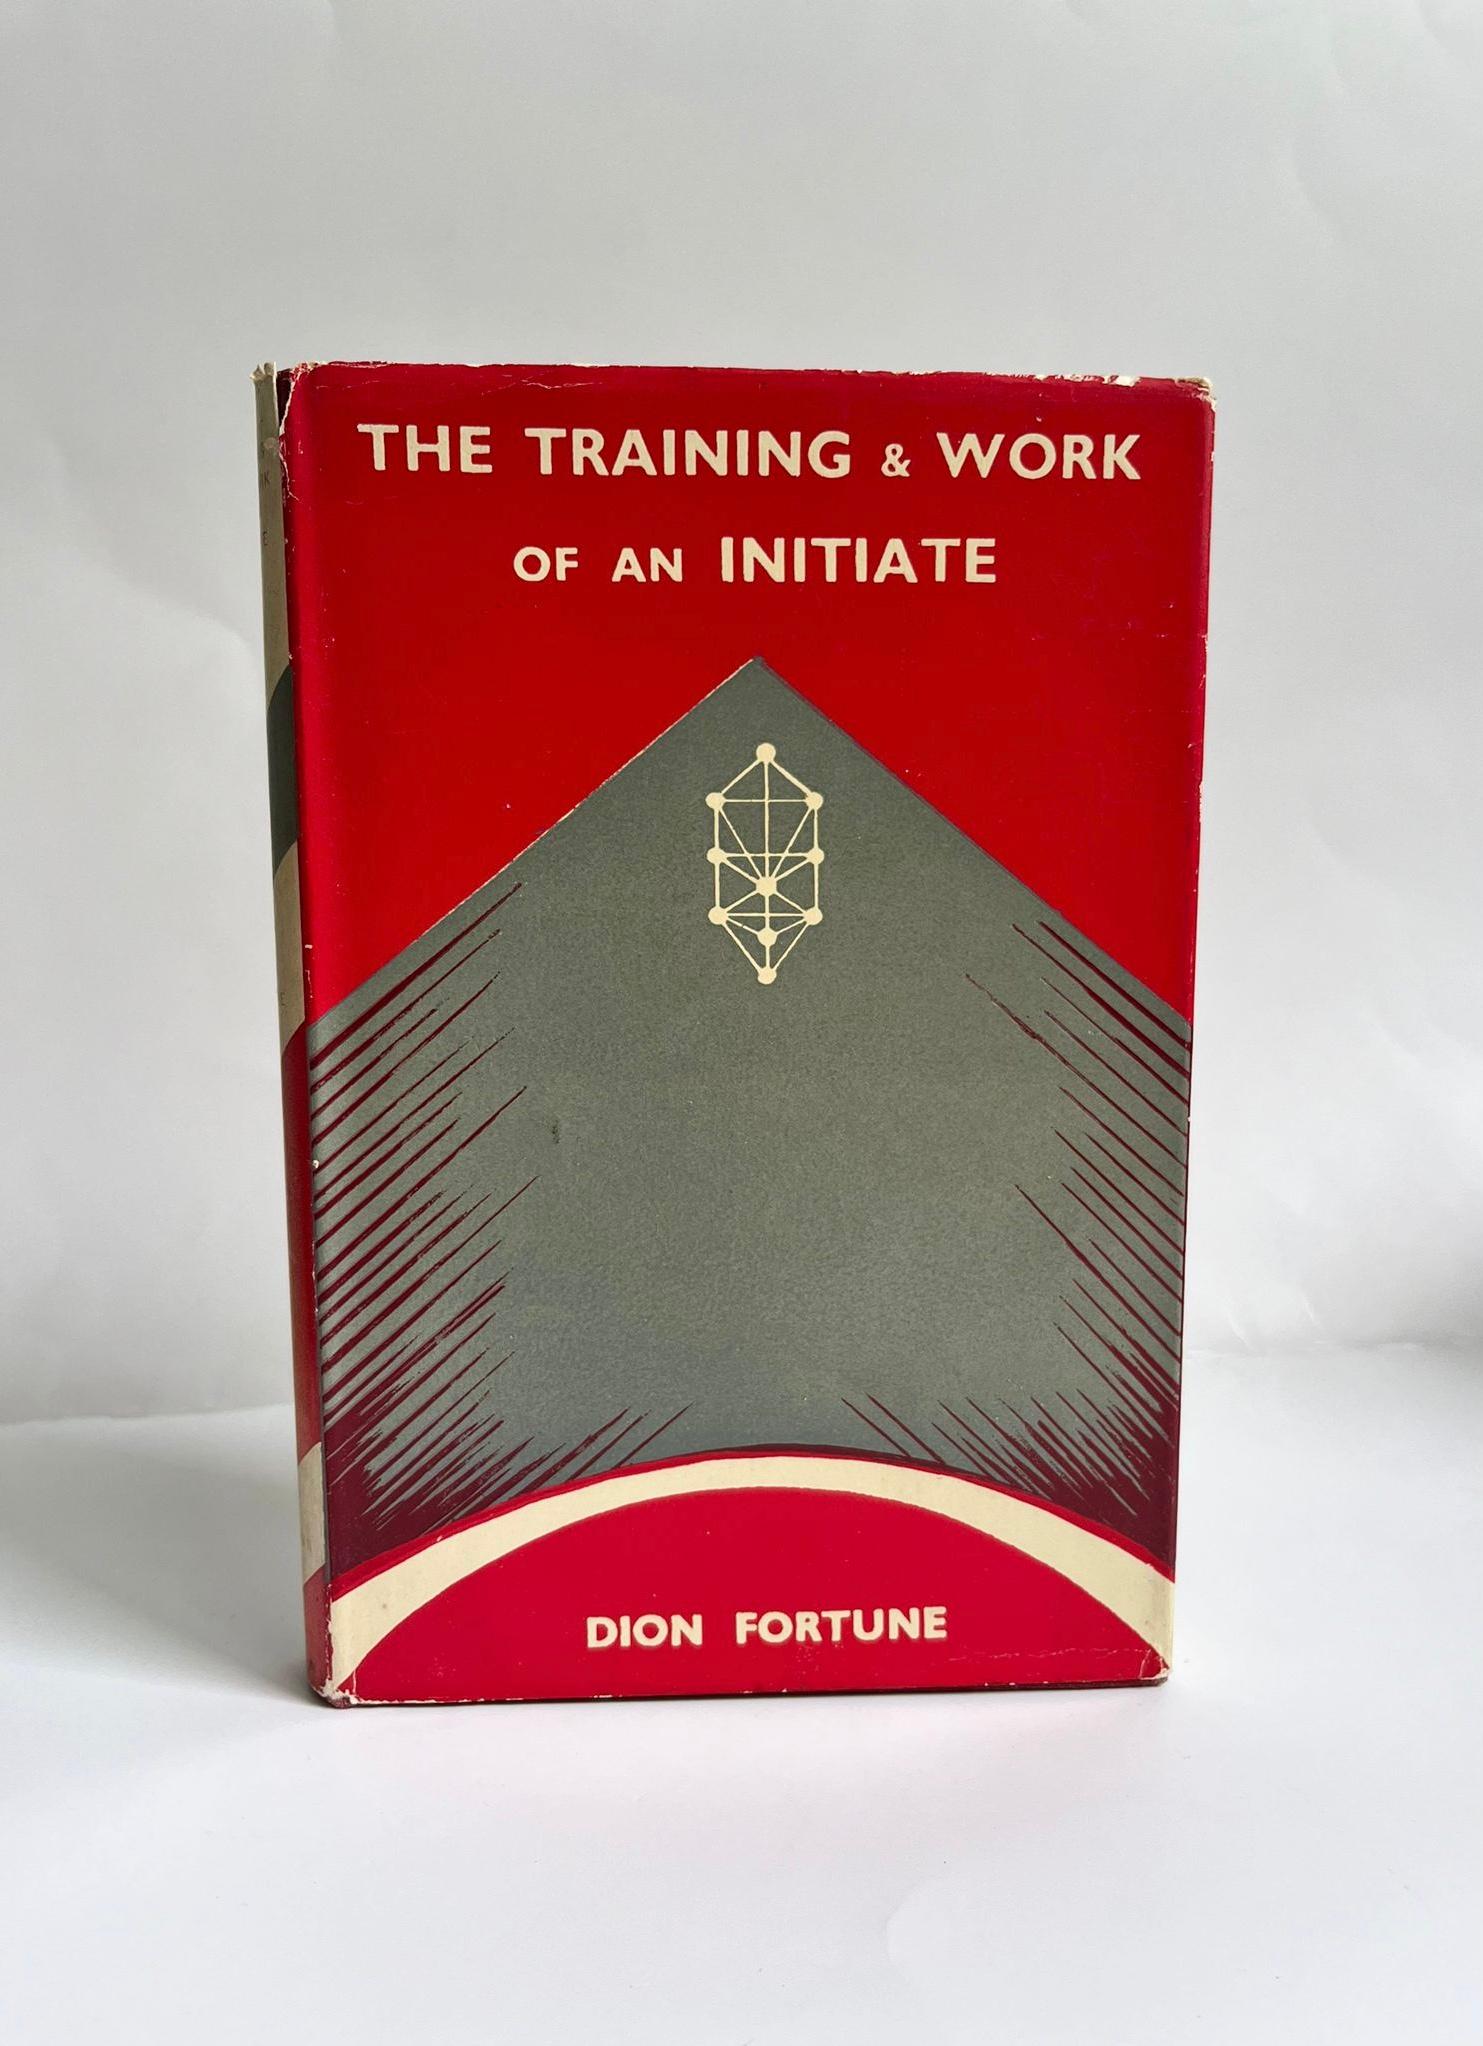 The Training & Work Of An Initiate by Dion Fortune